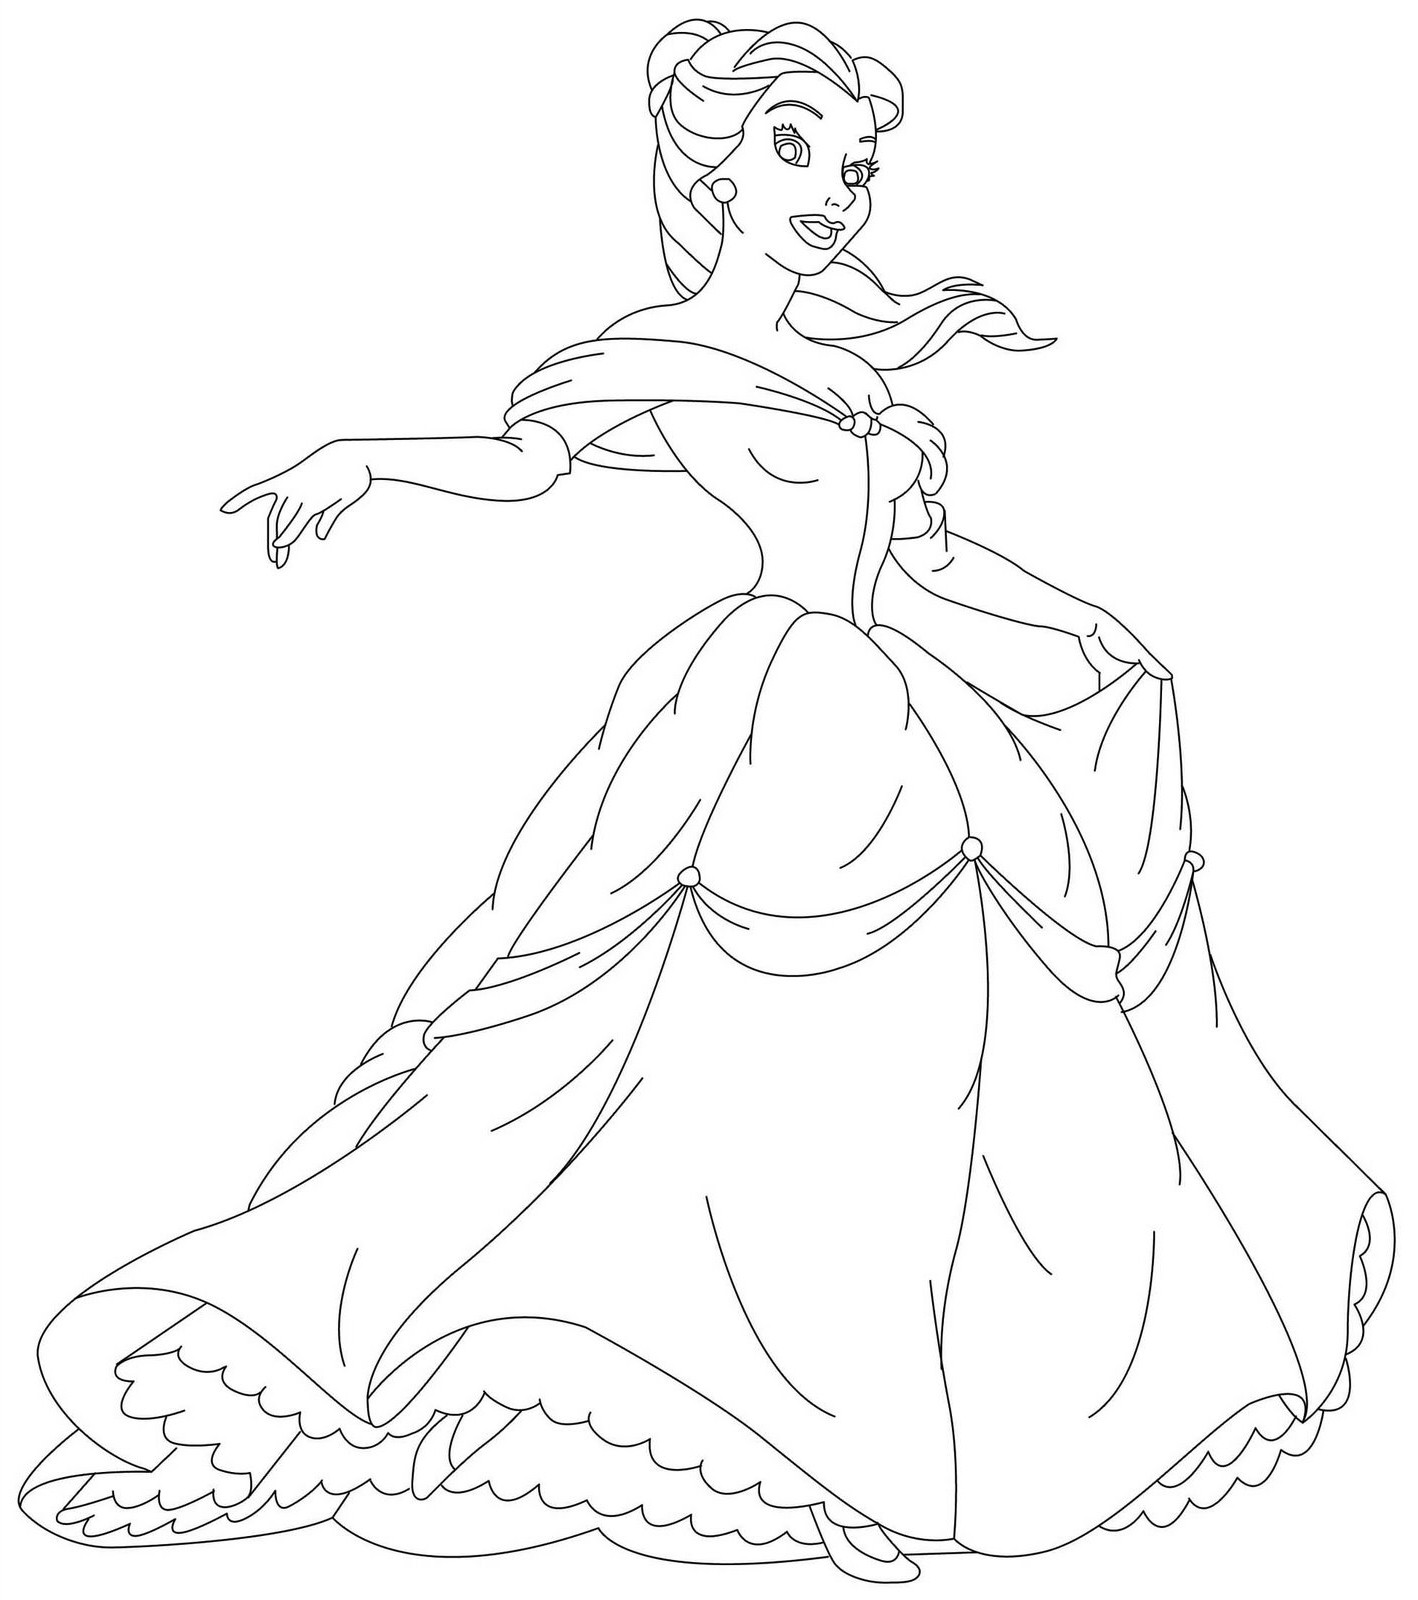 Disney Coloring Book Pages
 Free Printable Disney Princess Coloring Pages For Kids